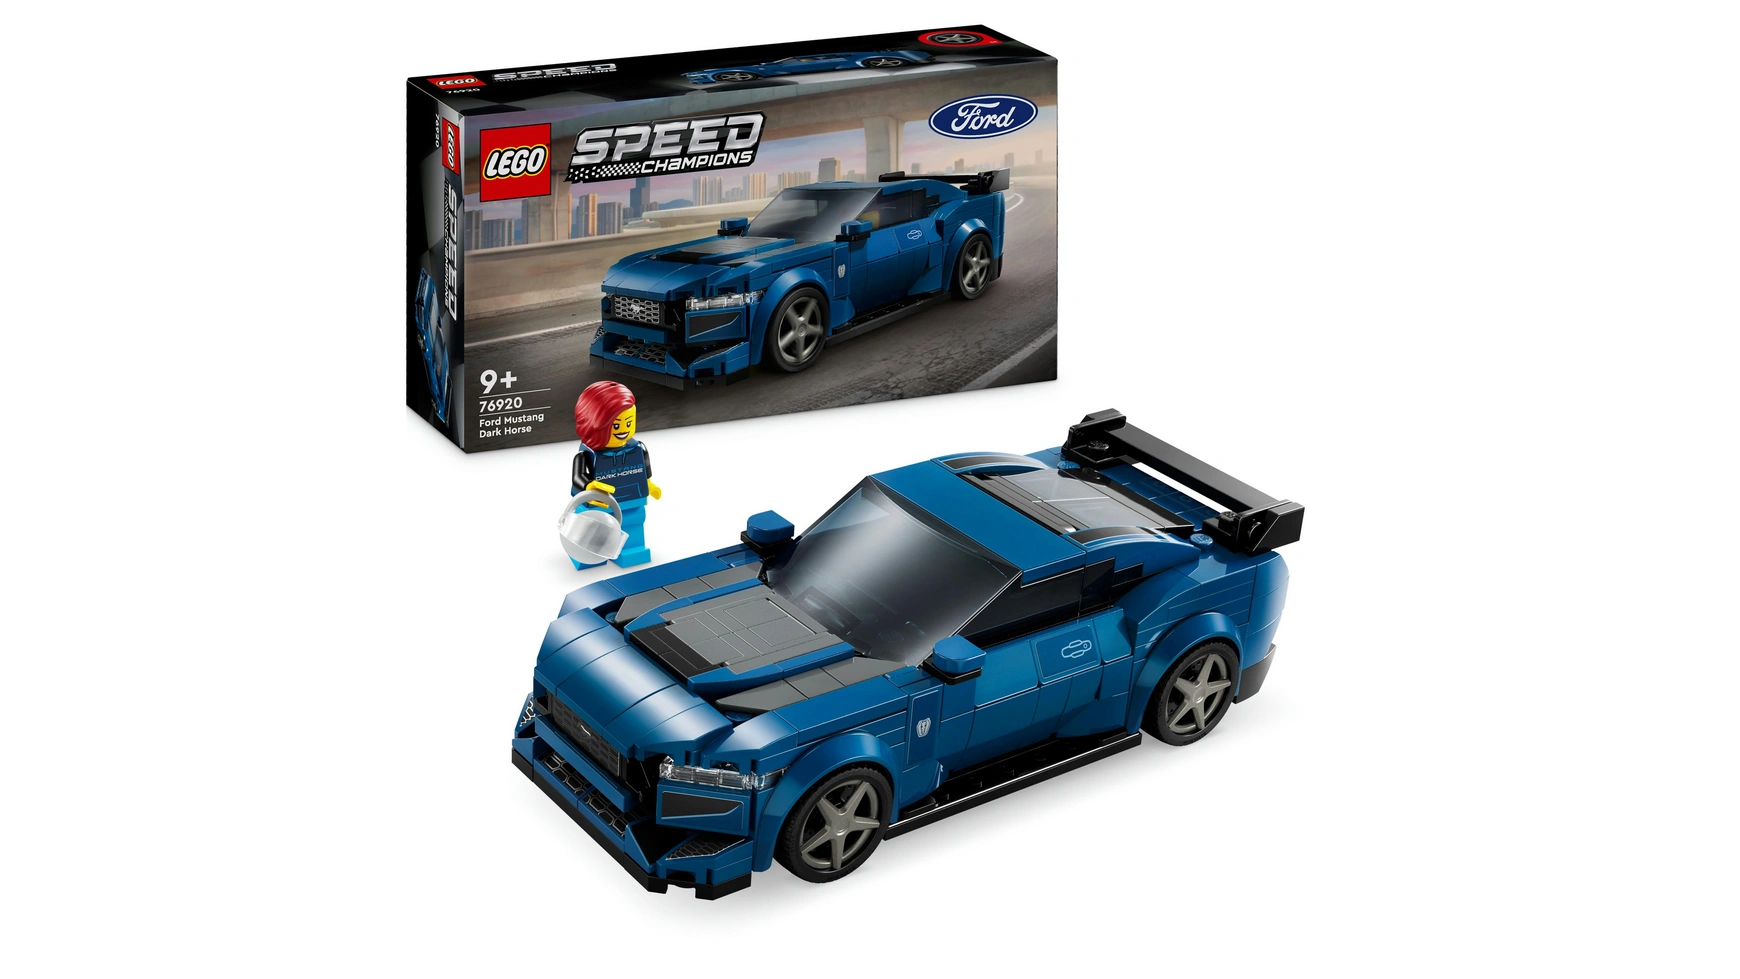 Lego Speed ​​​​Champions Игрушечный спортивный автомобиль Ford Mustang Dark Horse maisto 1 18 new silver ford 2020 mustang shelby gt500 sports car simulation alloy car model collection gifts boys toy